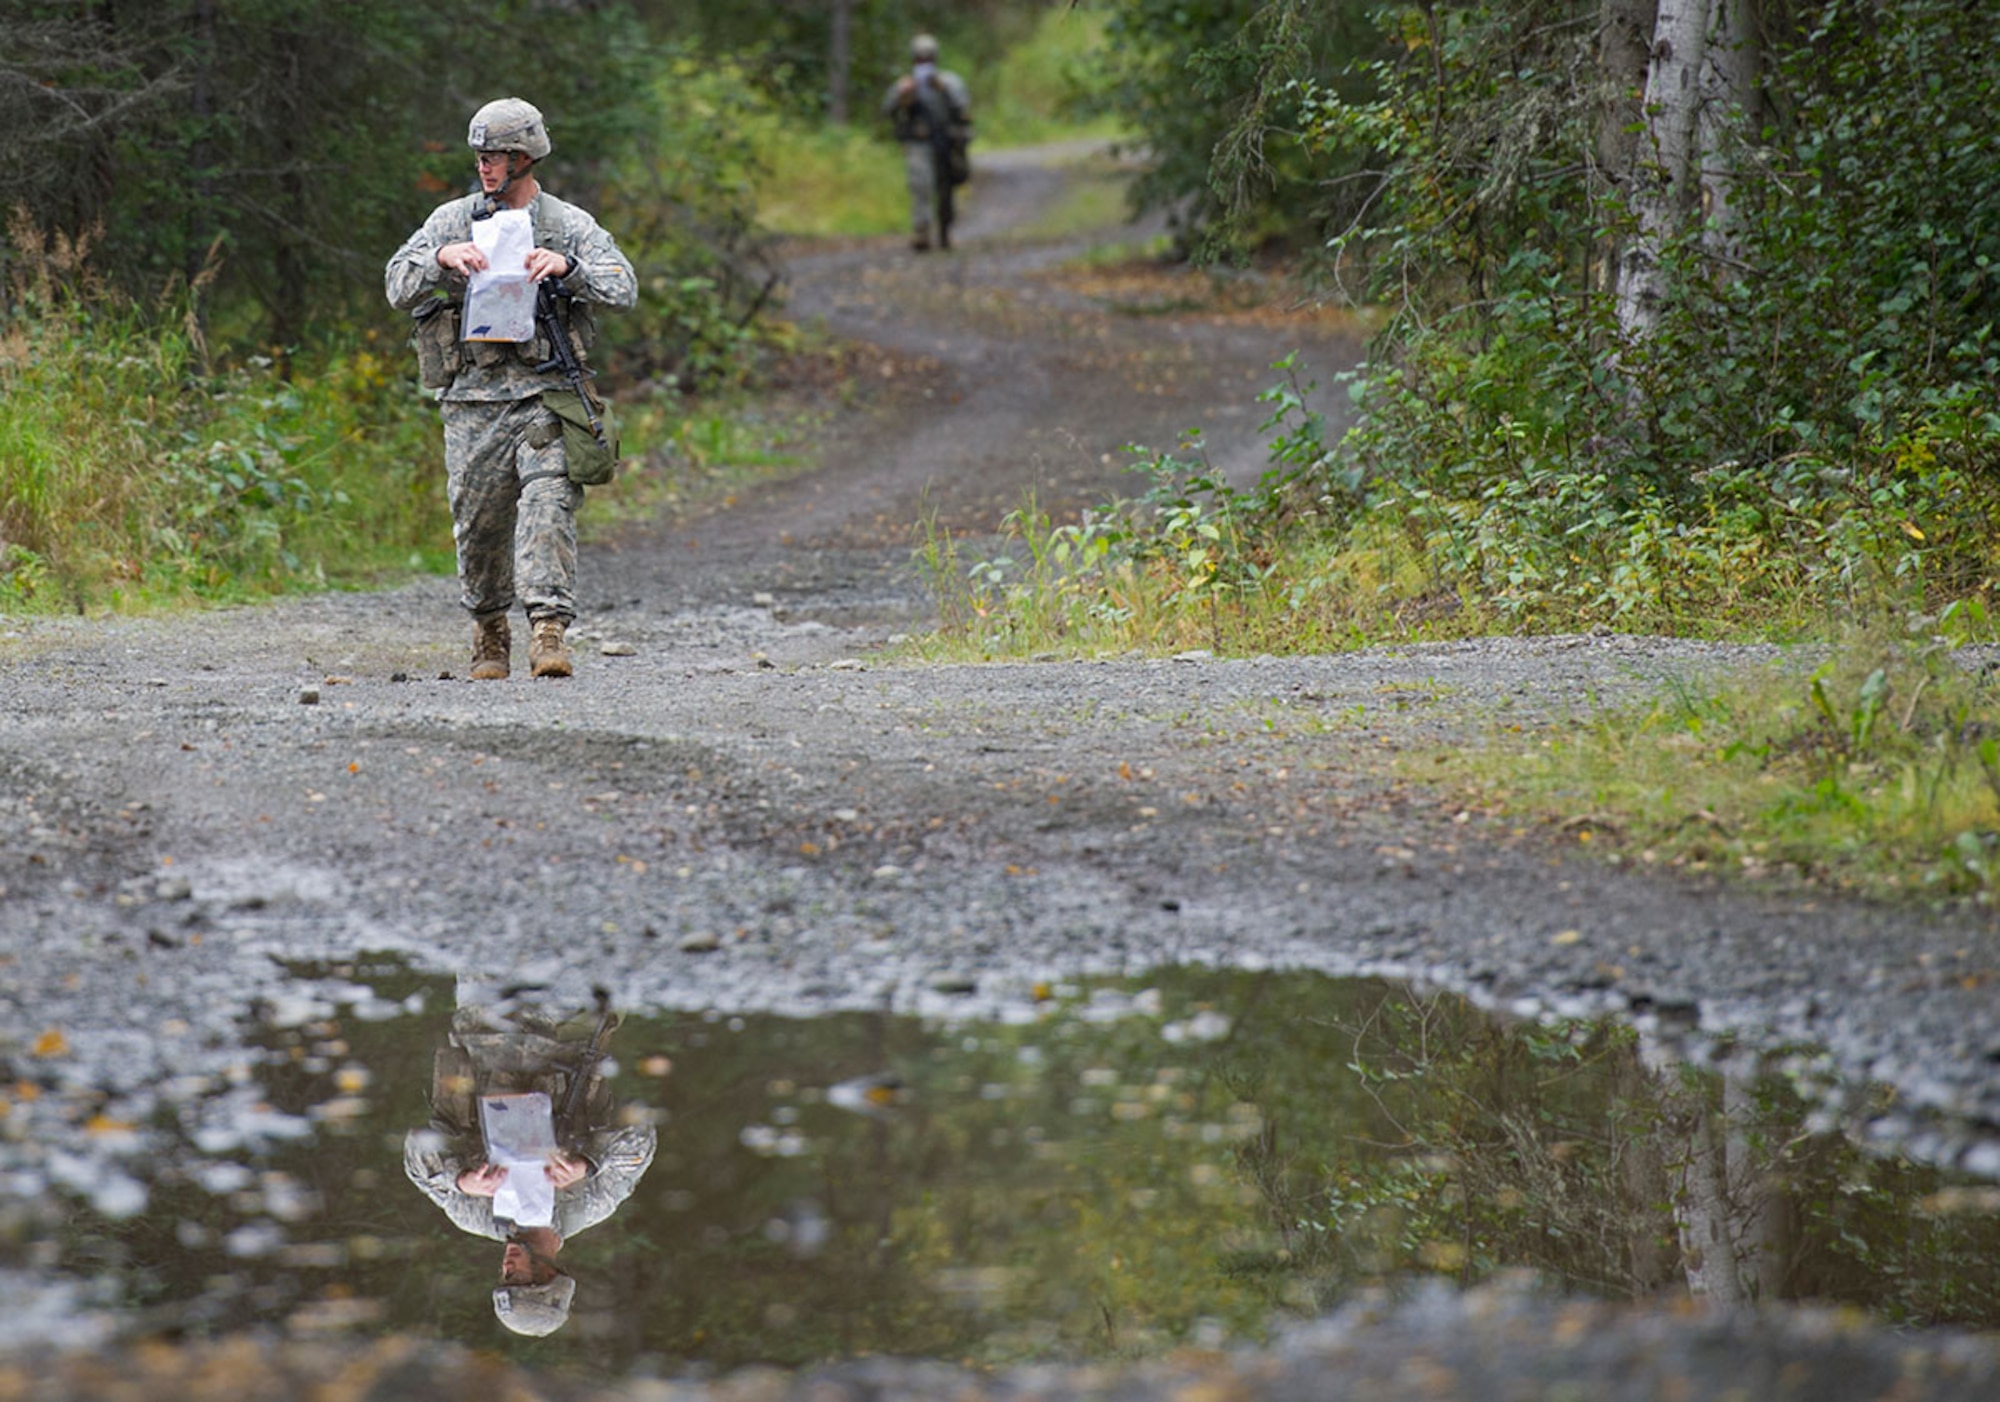 Army Capt. Edward Blyth, a native of Yorktown, Va., assigned to Dog Company, 3rd Battalion (Airborne), 509th Infantry Regiment, 4th Infantry Brigade Combat Team (Airborne), 25th Infantry Division, U.S. Army Alaska, is seen reflected in a pool of rain water as he walks to point on the land navigation course during Expert Infantryman Badge qualification on Joint Base Elmendorf-Richardson, Tuesday, Sept. 9, 2014. The Expert Infantryman Badge was approved by the Secretary of War on October 7, 1943, and is currently awarded to U.S. Army personnel who hold infantry or special forces military occupational specialties and successfully pass the rigors of the course. (U.S. Air Force photo/Justin Connaher)